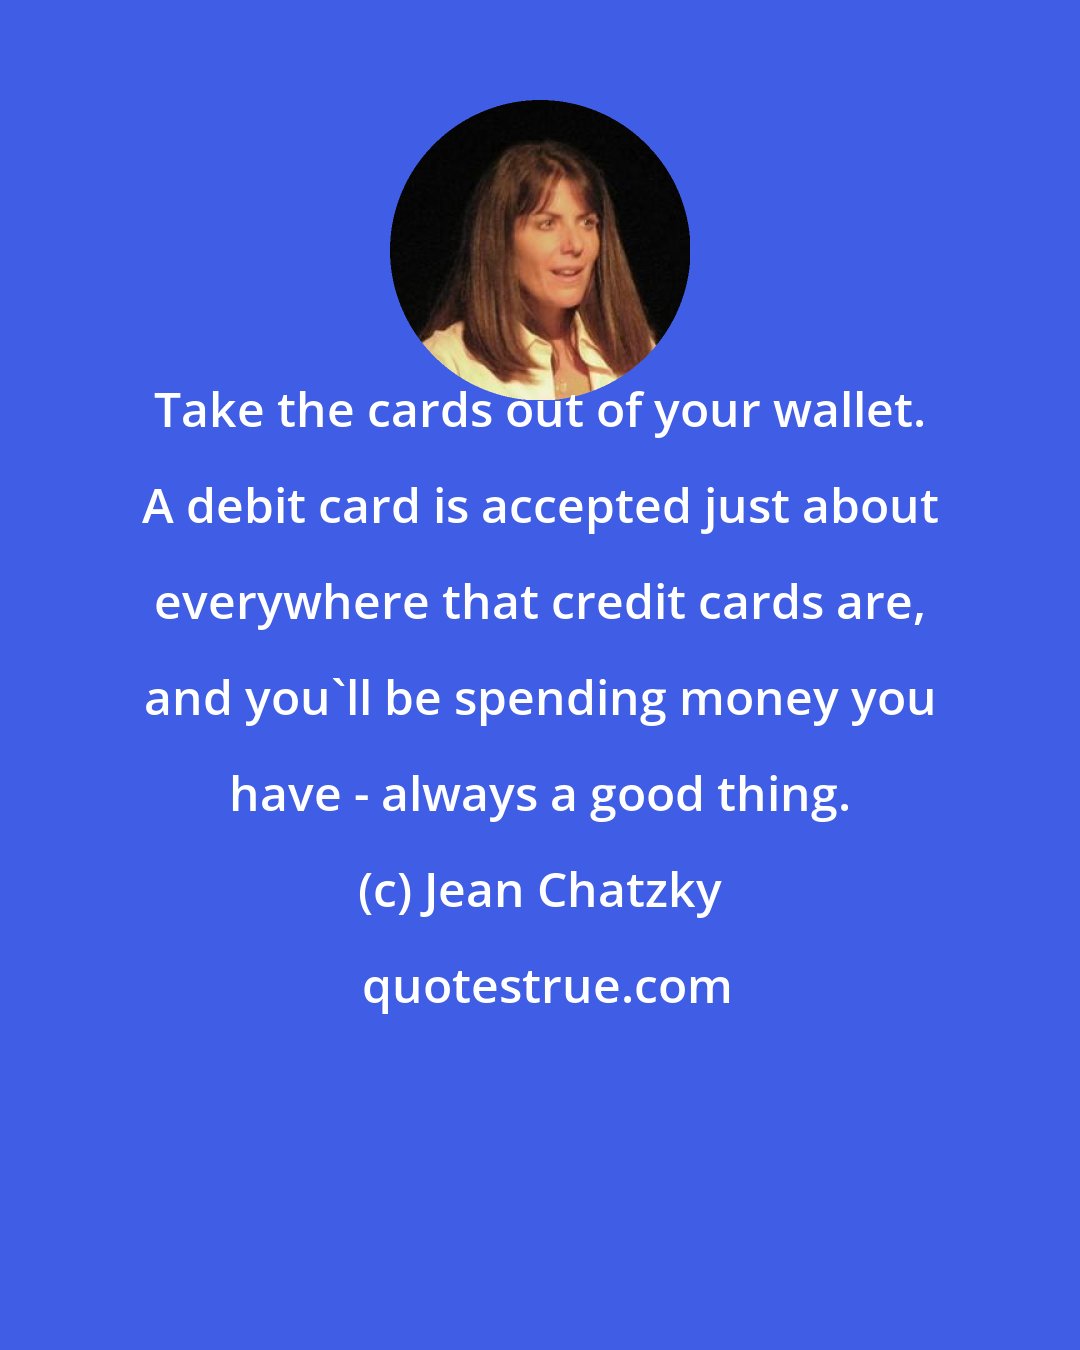 Jean Chatzky: Take the cards out of your wallet. A debit card is accepted just about everywhere that credit cards are, and you'll be spending money you have - always a good thing.